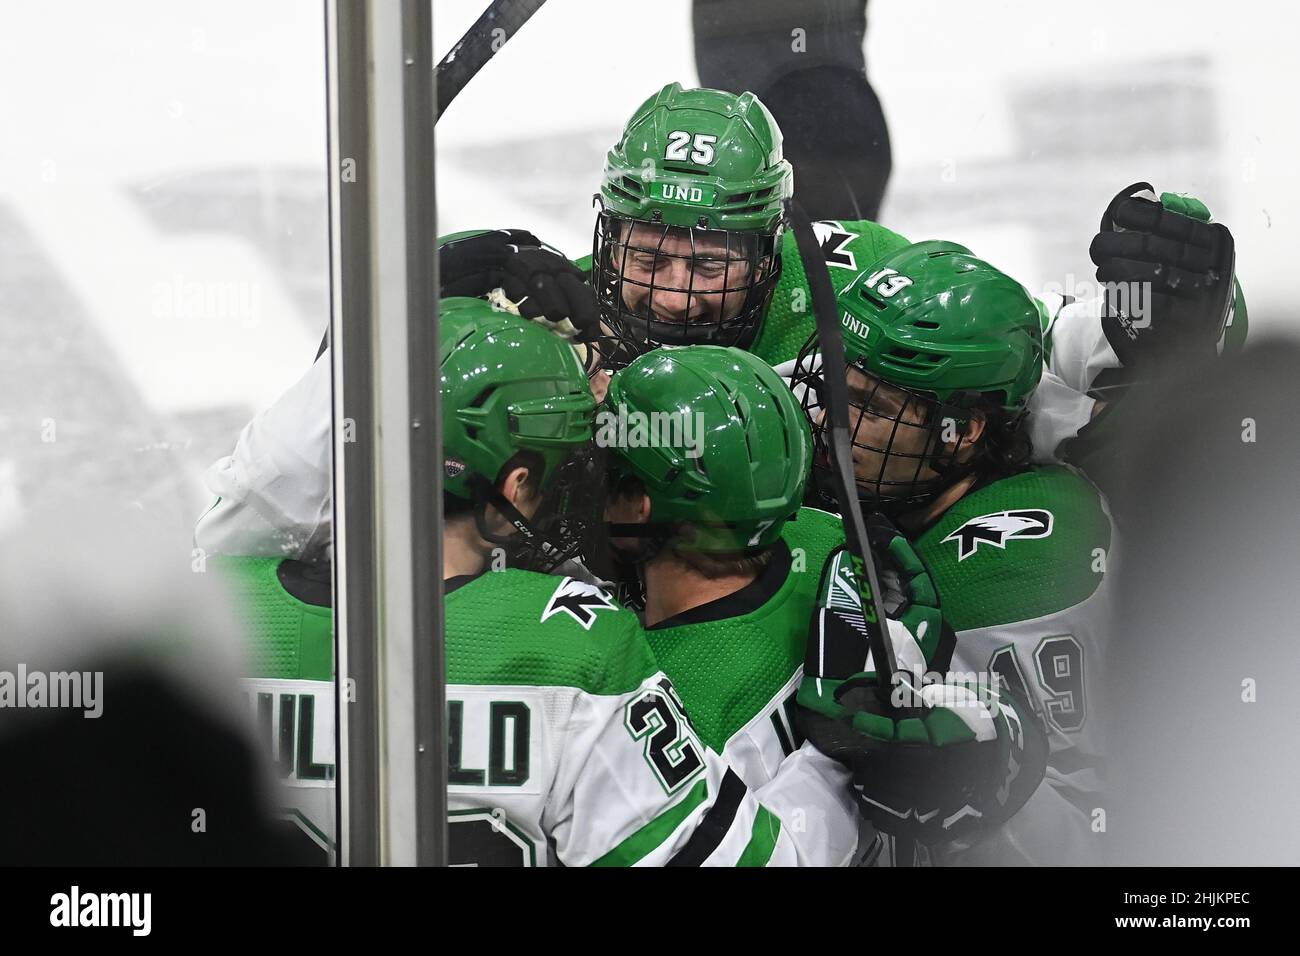 North Dakota Fighting Hawks defenseman Tyler Kleven (25) piles on a celebration pile after North Dakota scored a goal during a NCAA men's hockey game between the St. Cloud State University Huskies and the University of North Dakota Fighting Hawks at Ralph Engelstad Arena in Grand Forks, ND on Saturday, January 29, 2022. The game ended in a 3-3 tie and UND won a conference point by winning a shootout. By Russell Hons/CSM Stock Photo